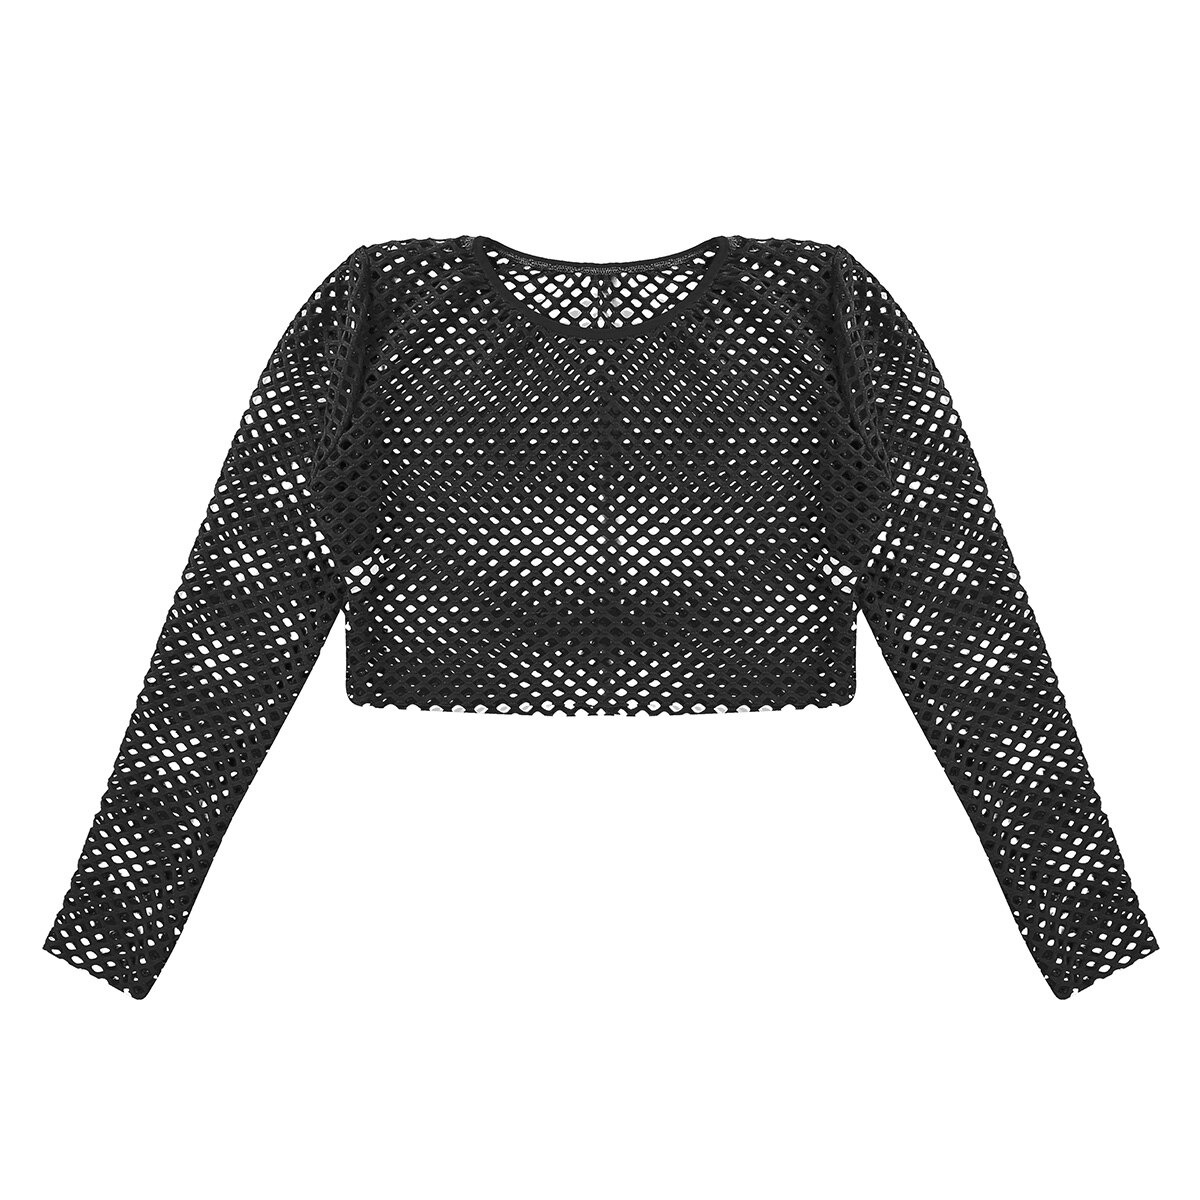 Women's Elastic Fishnet Cropped Top / Transparent Long Sleeve Tops / Female Sexy Summer Clothing - HARD'N'HEAVY